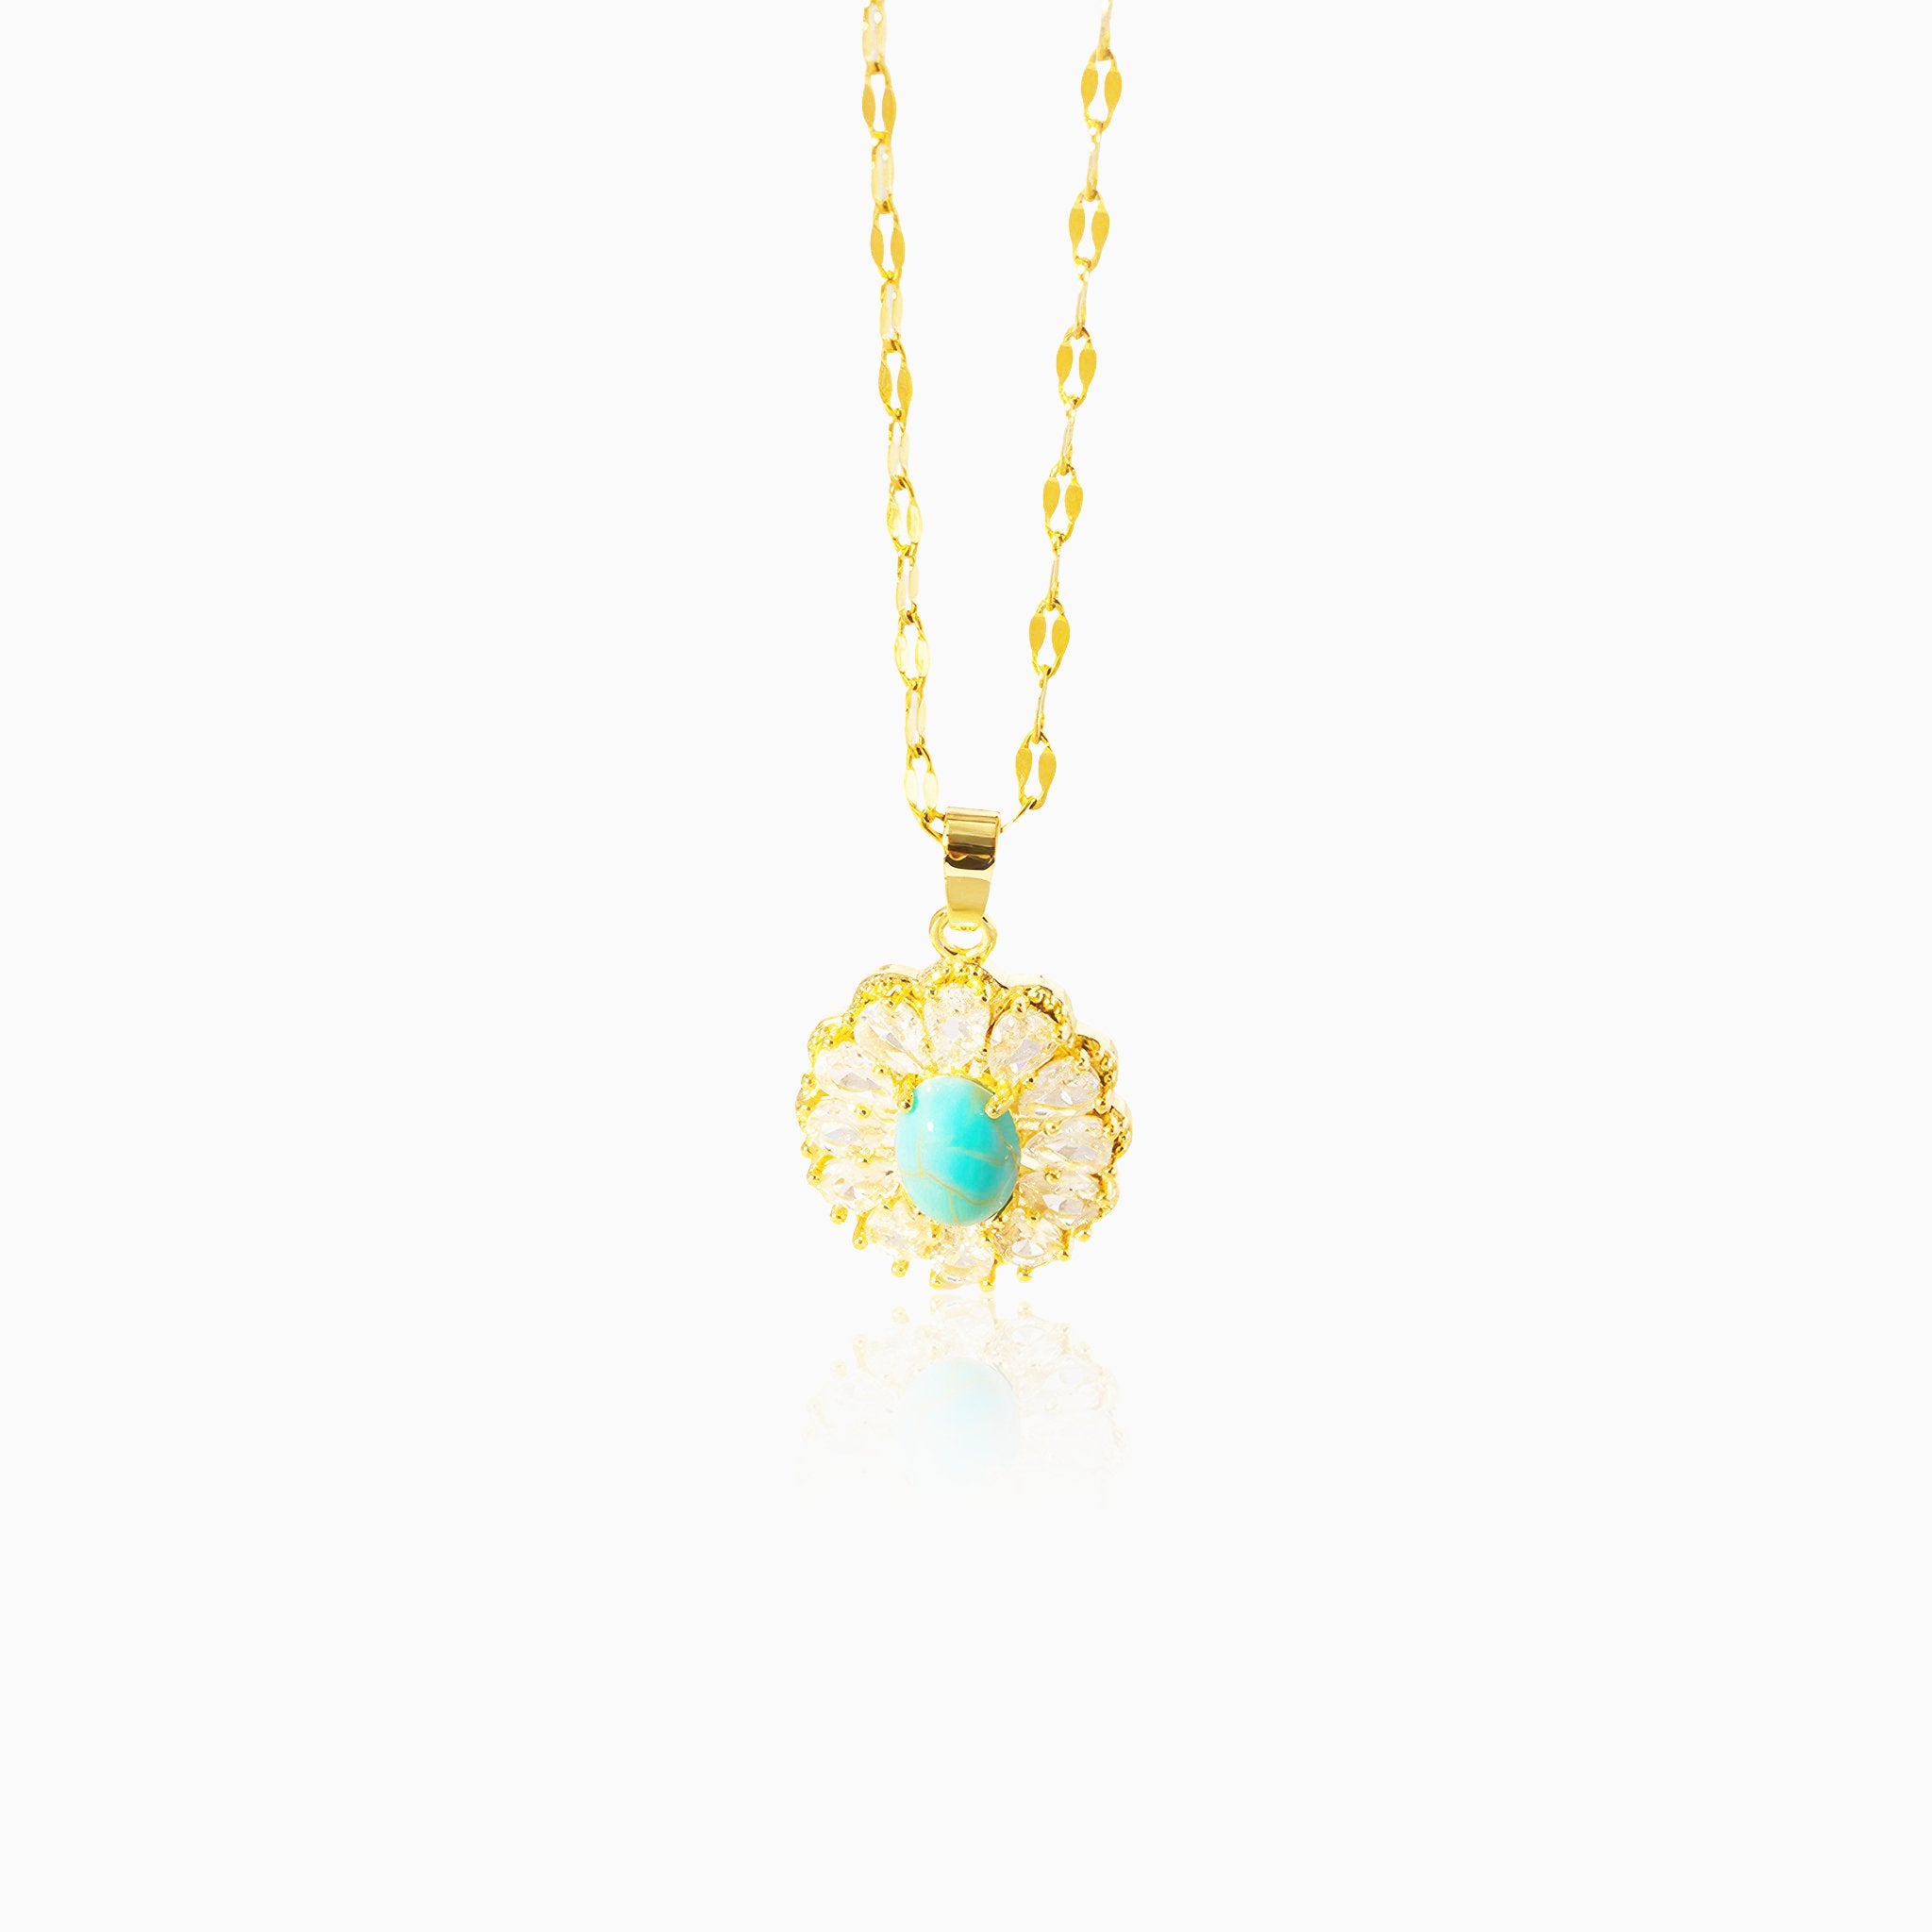 Sun Disc Necklace with Dazzling White Gemstones - Nobbier - Necklace - 18K Gold And Titanium PVD Coated Jewelry